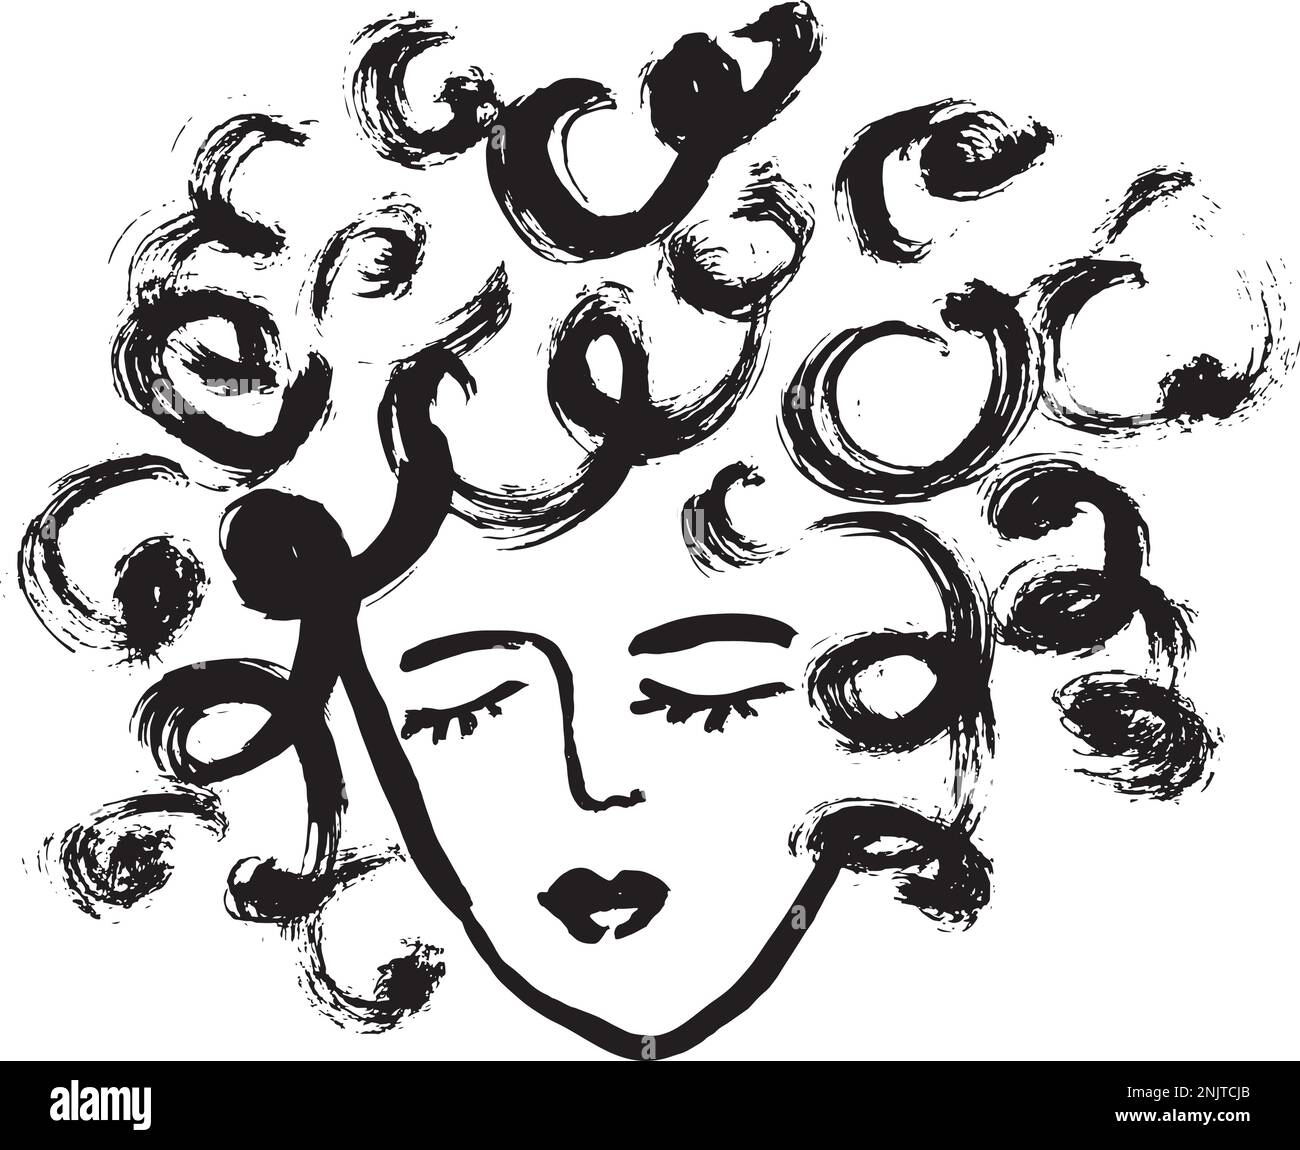 Dry Brush Grunge Style Simple Girl With Closed Eyes Portrait. Stock Vector